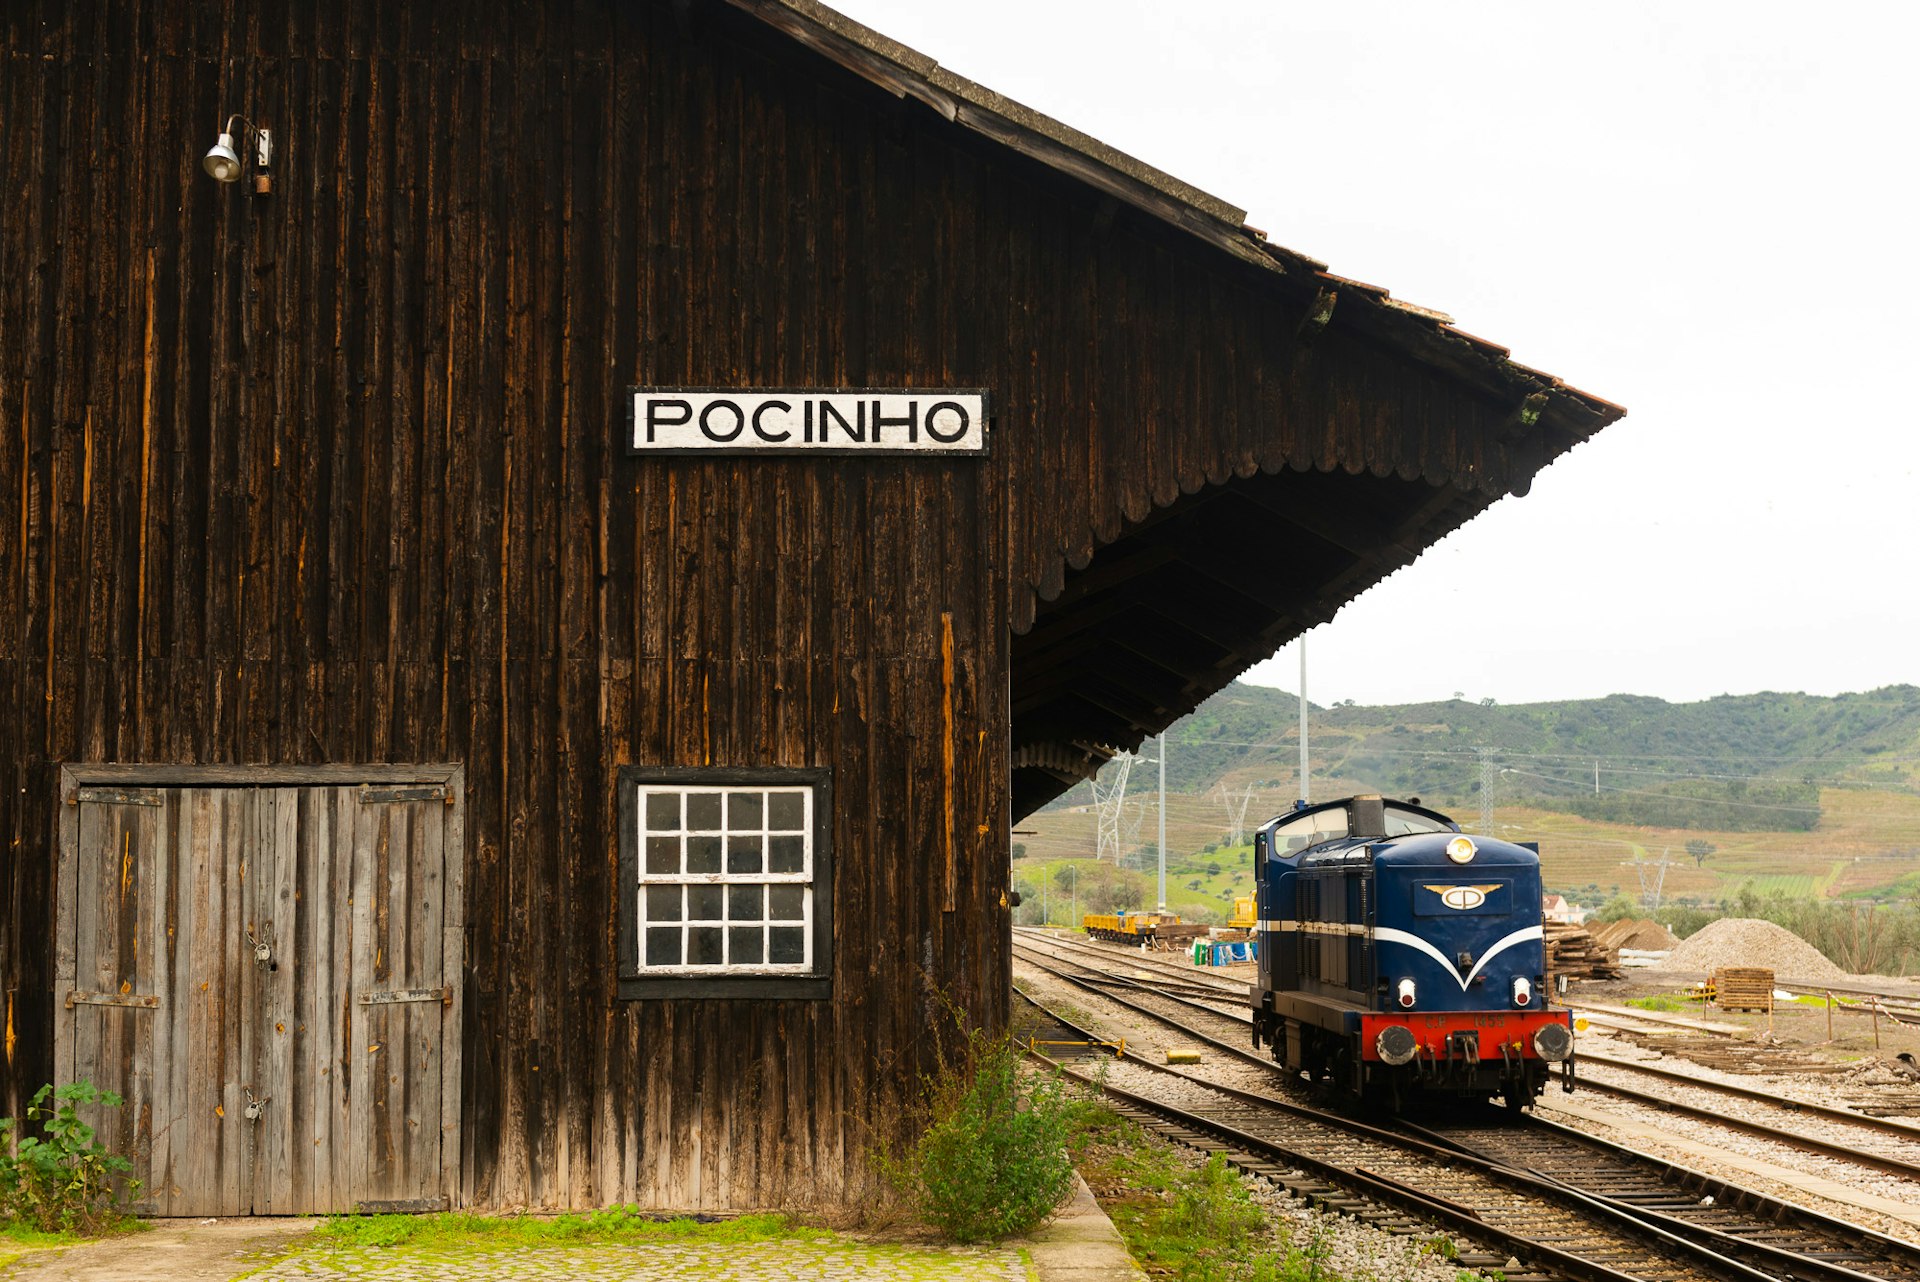 A wooden station building beside a train engine